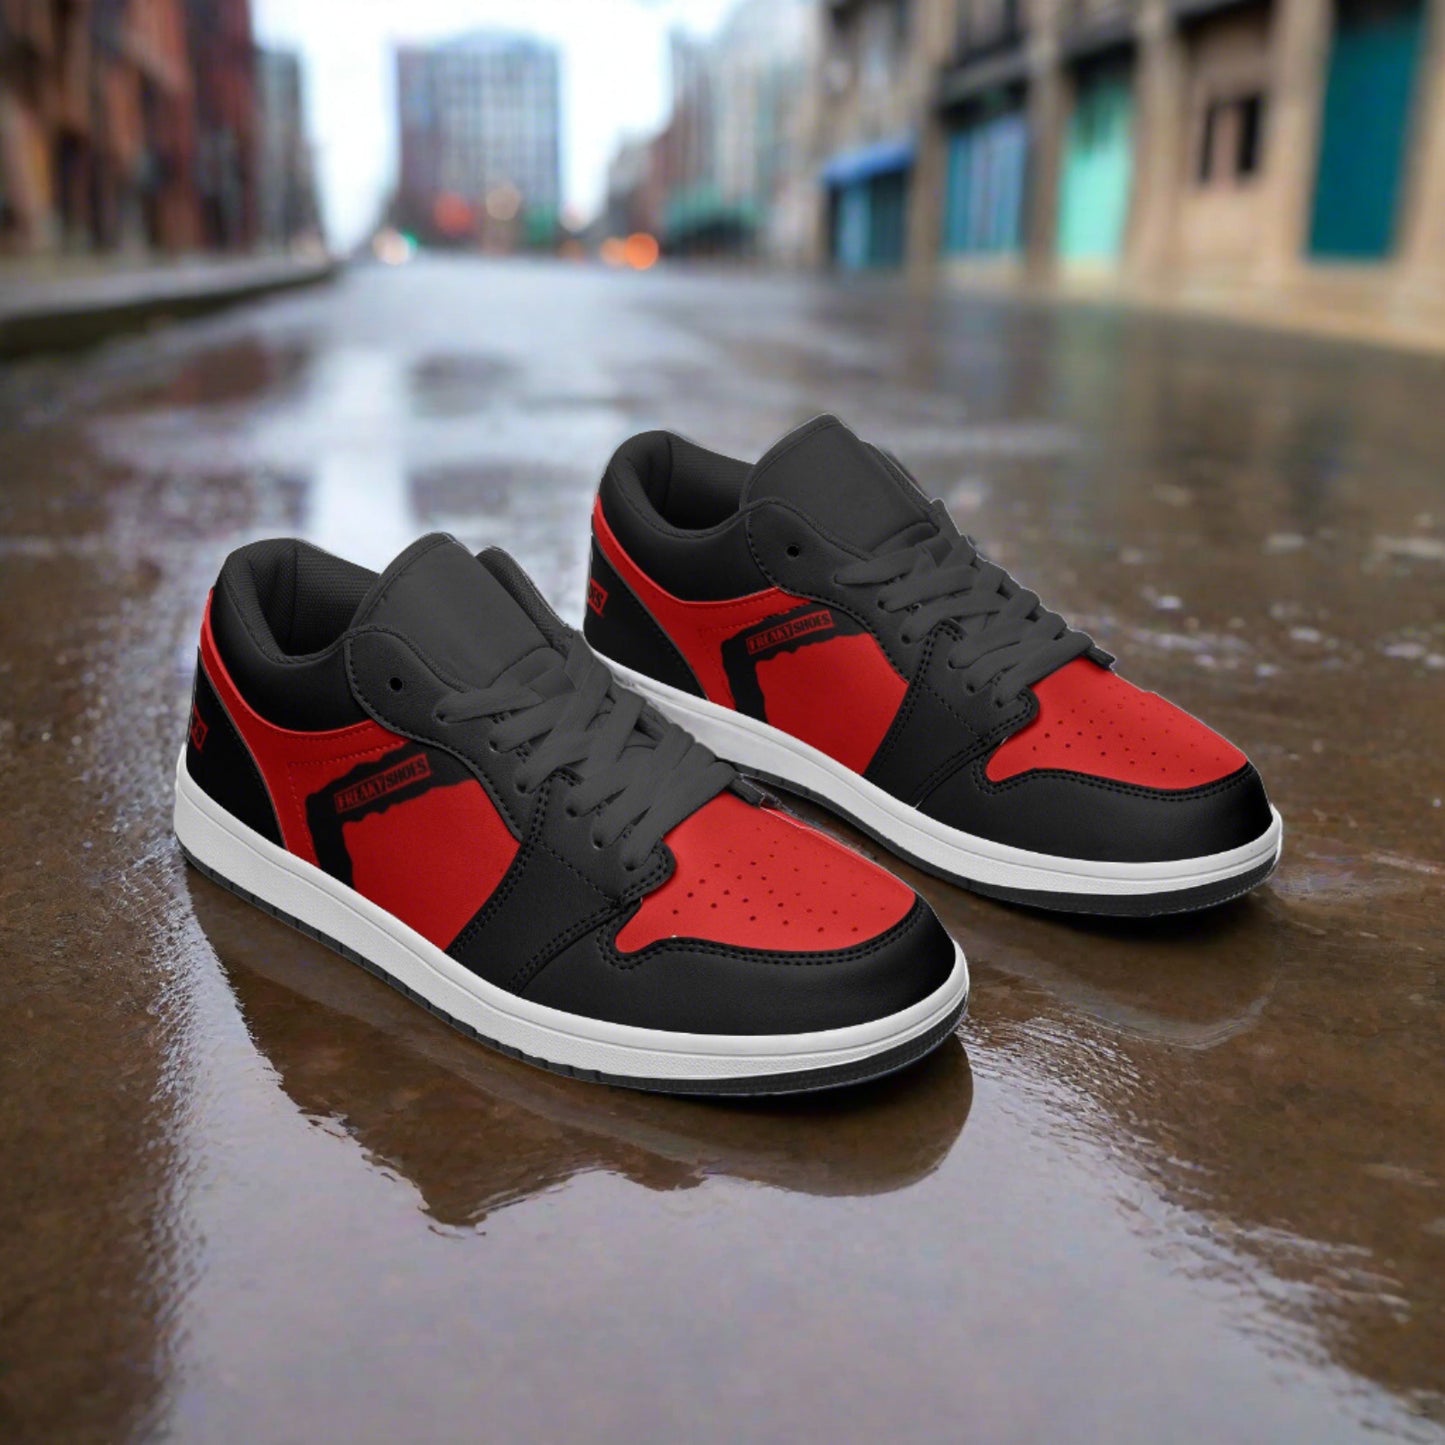 Freaky Shoes® Red and Black Unisex Low Top Leather Sneakers